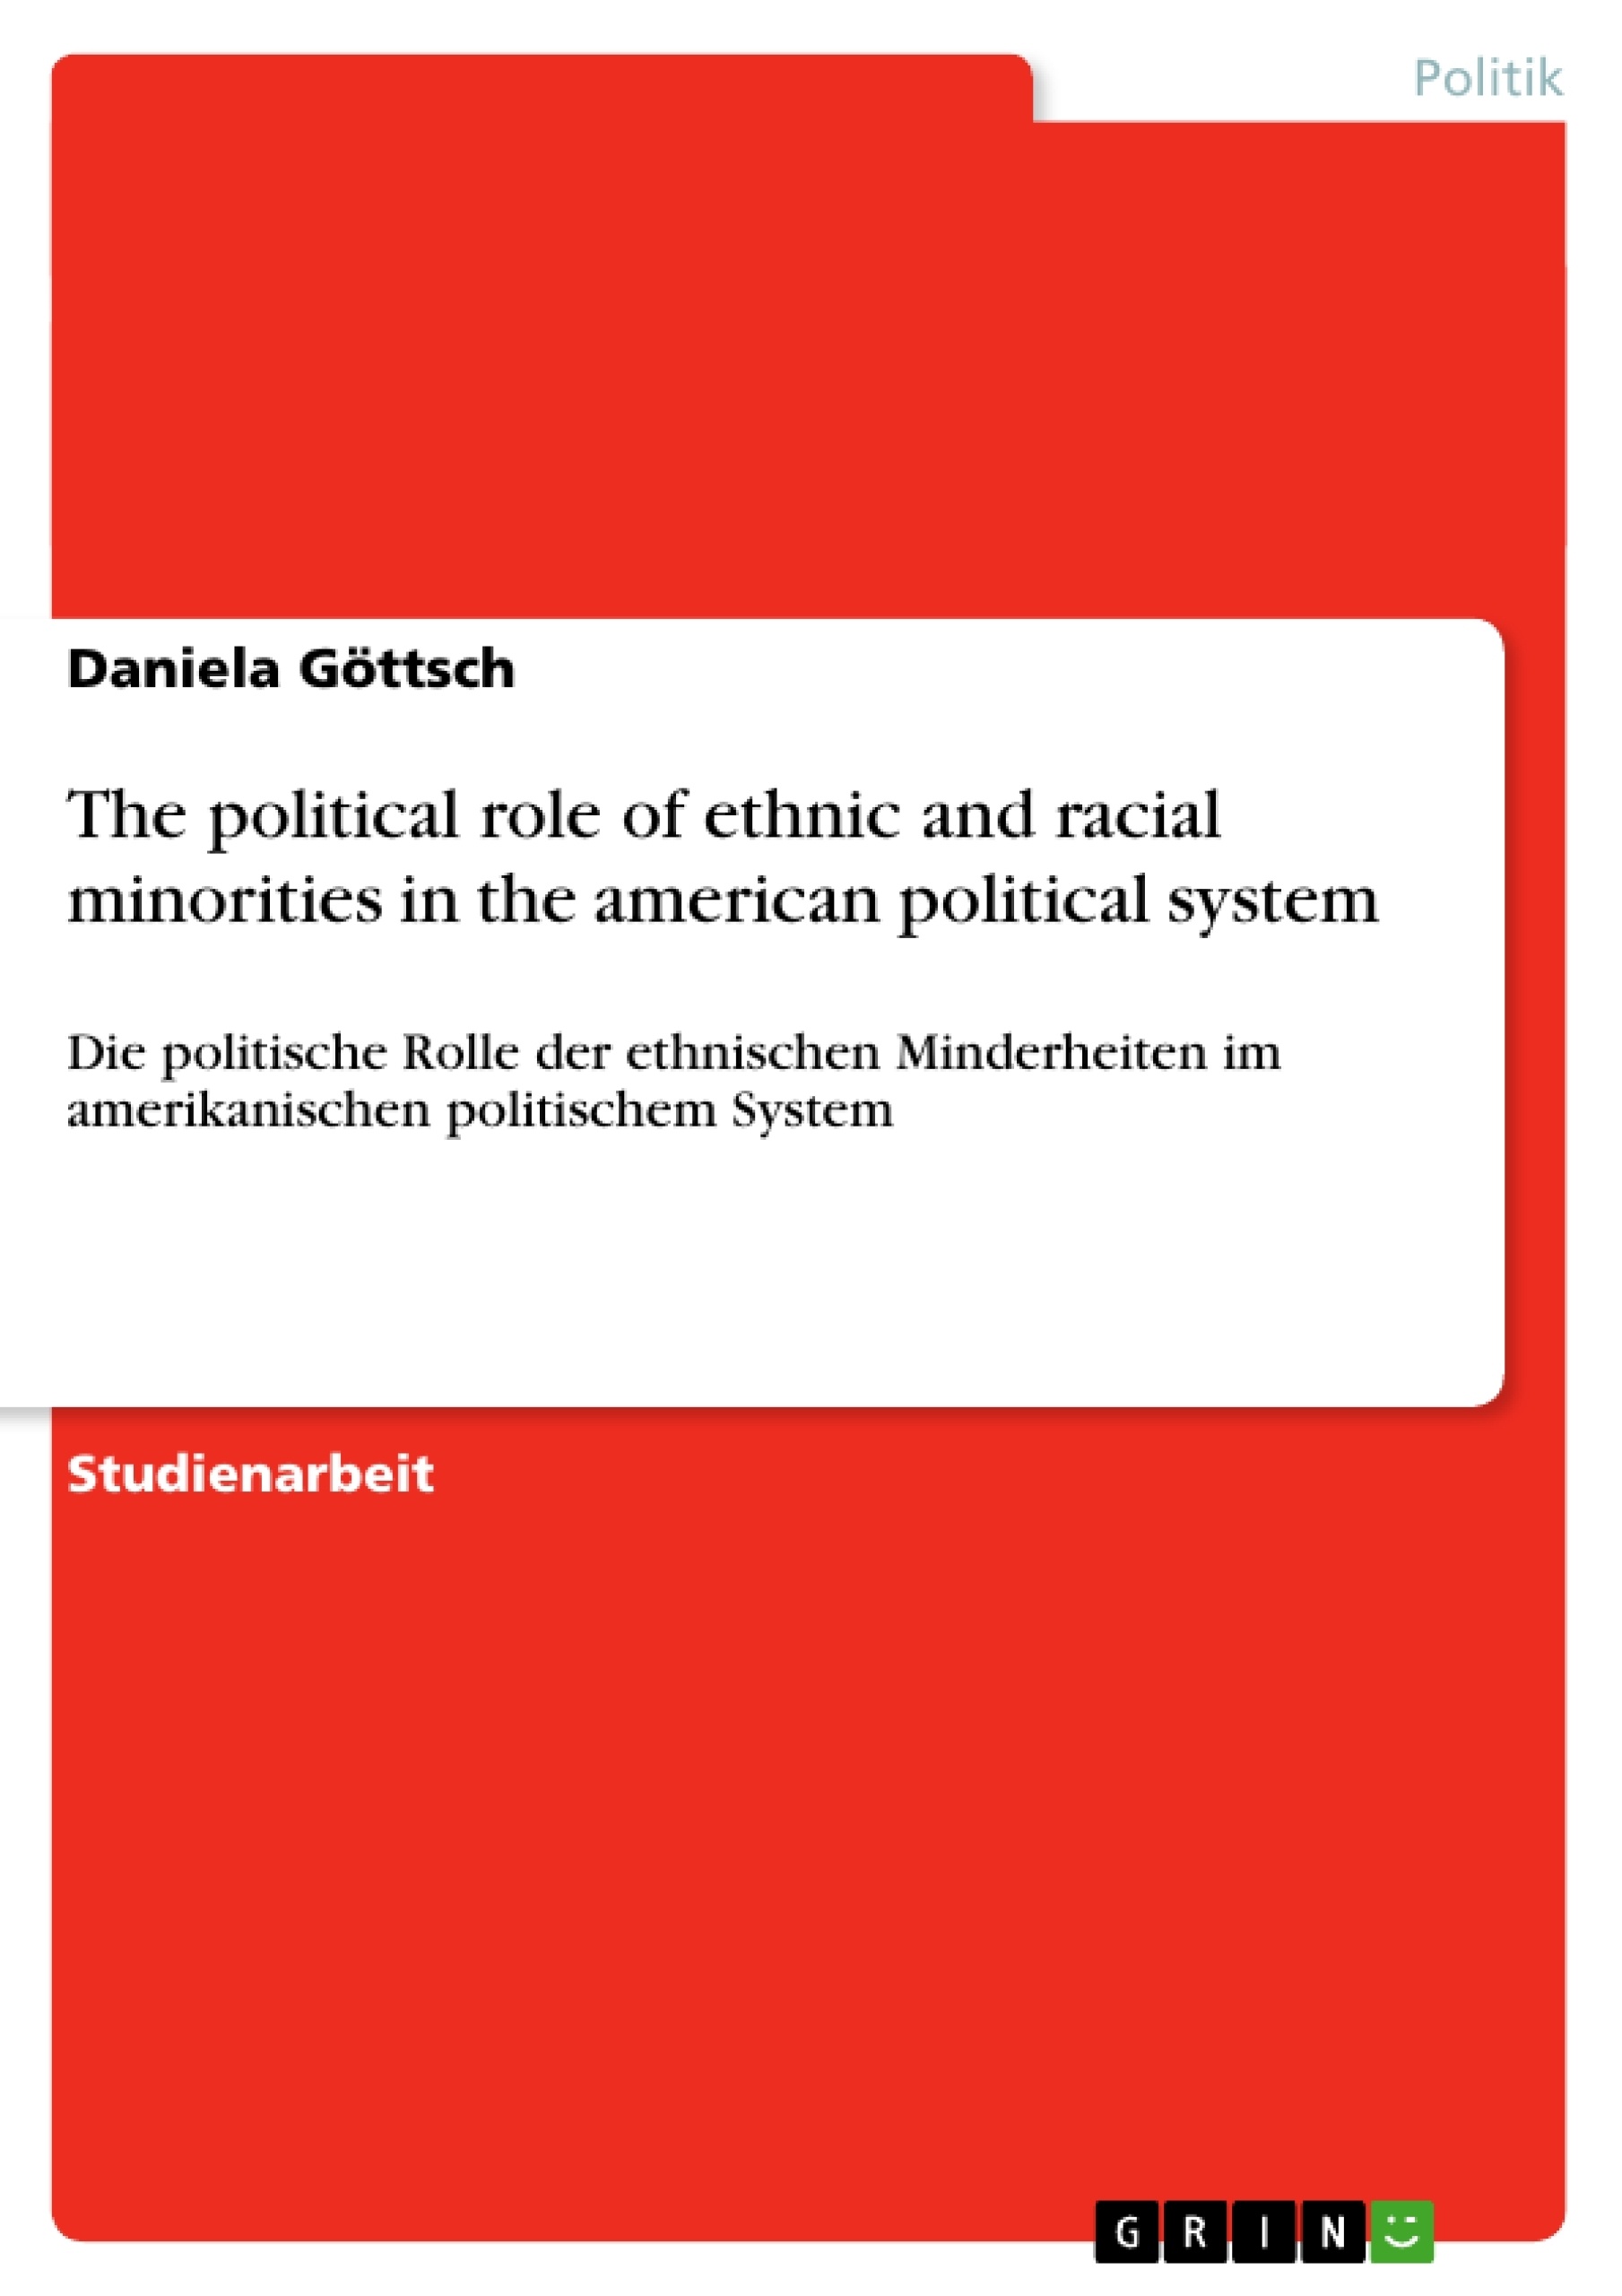 Título: The political role of ethnic and racial minorities in the american political system